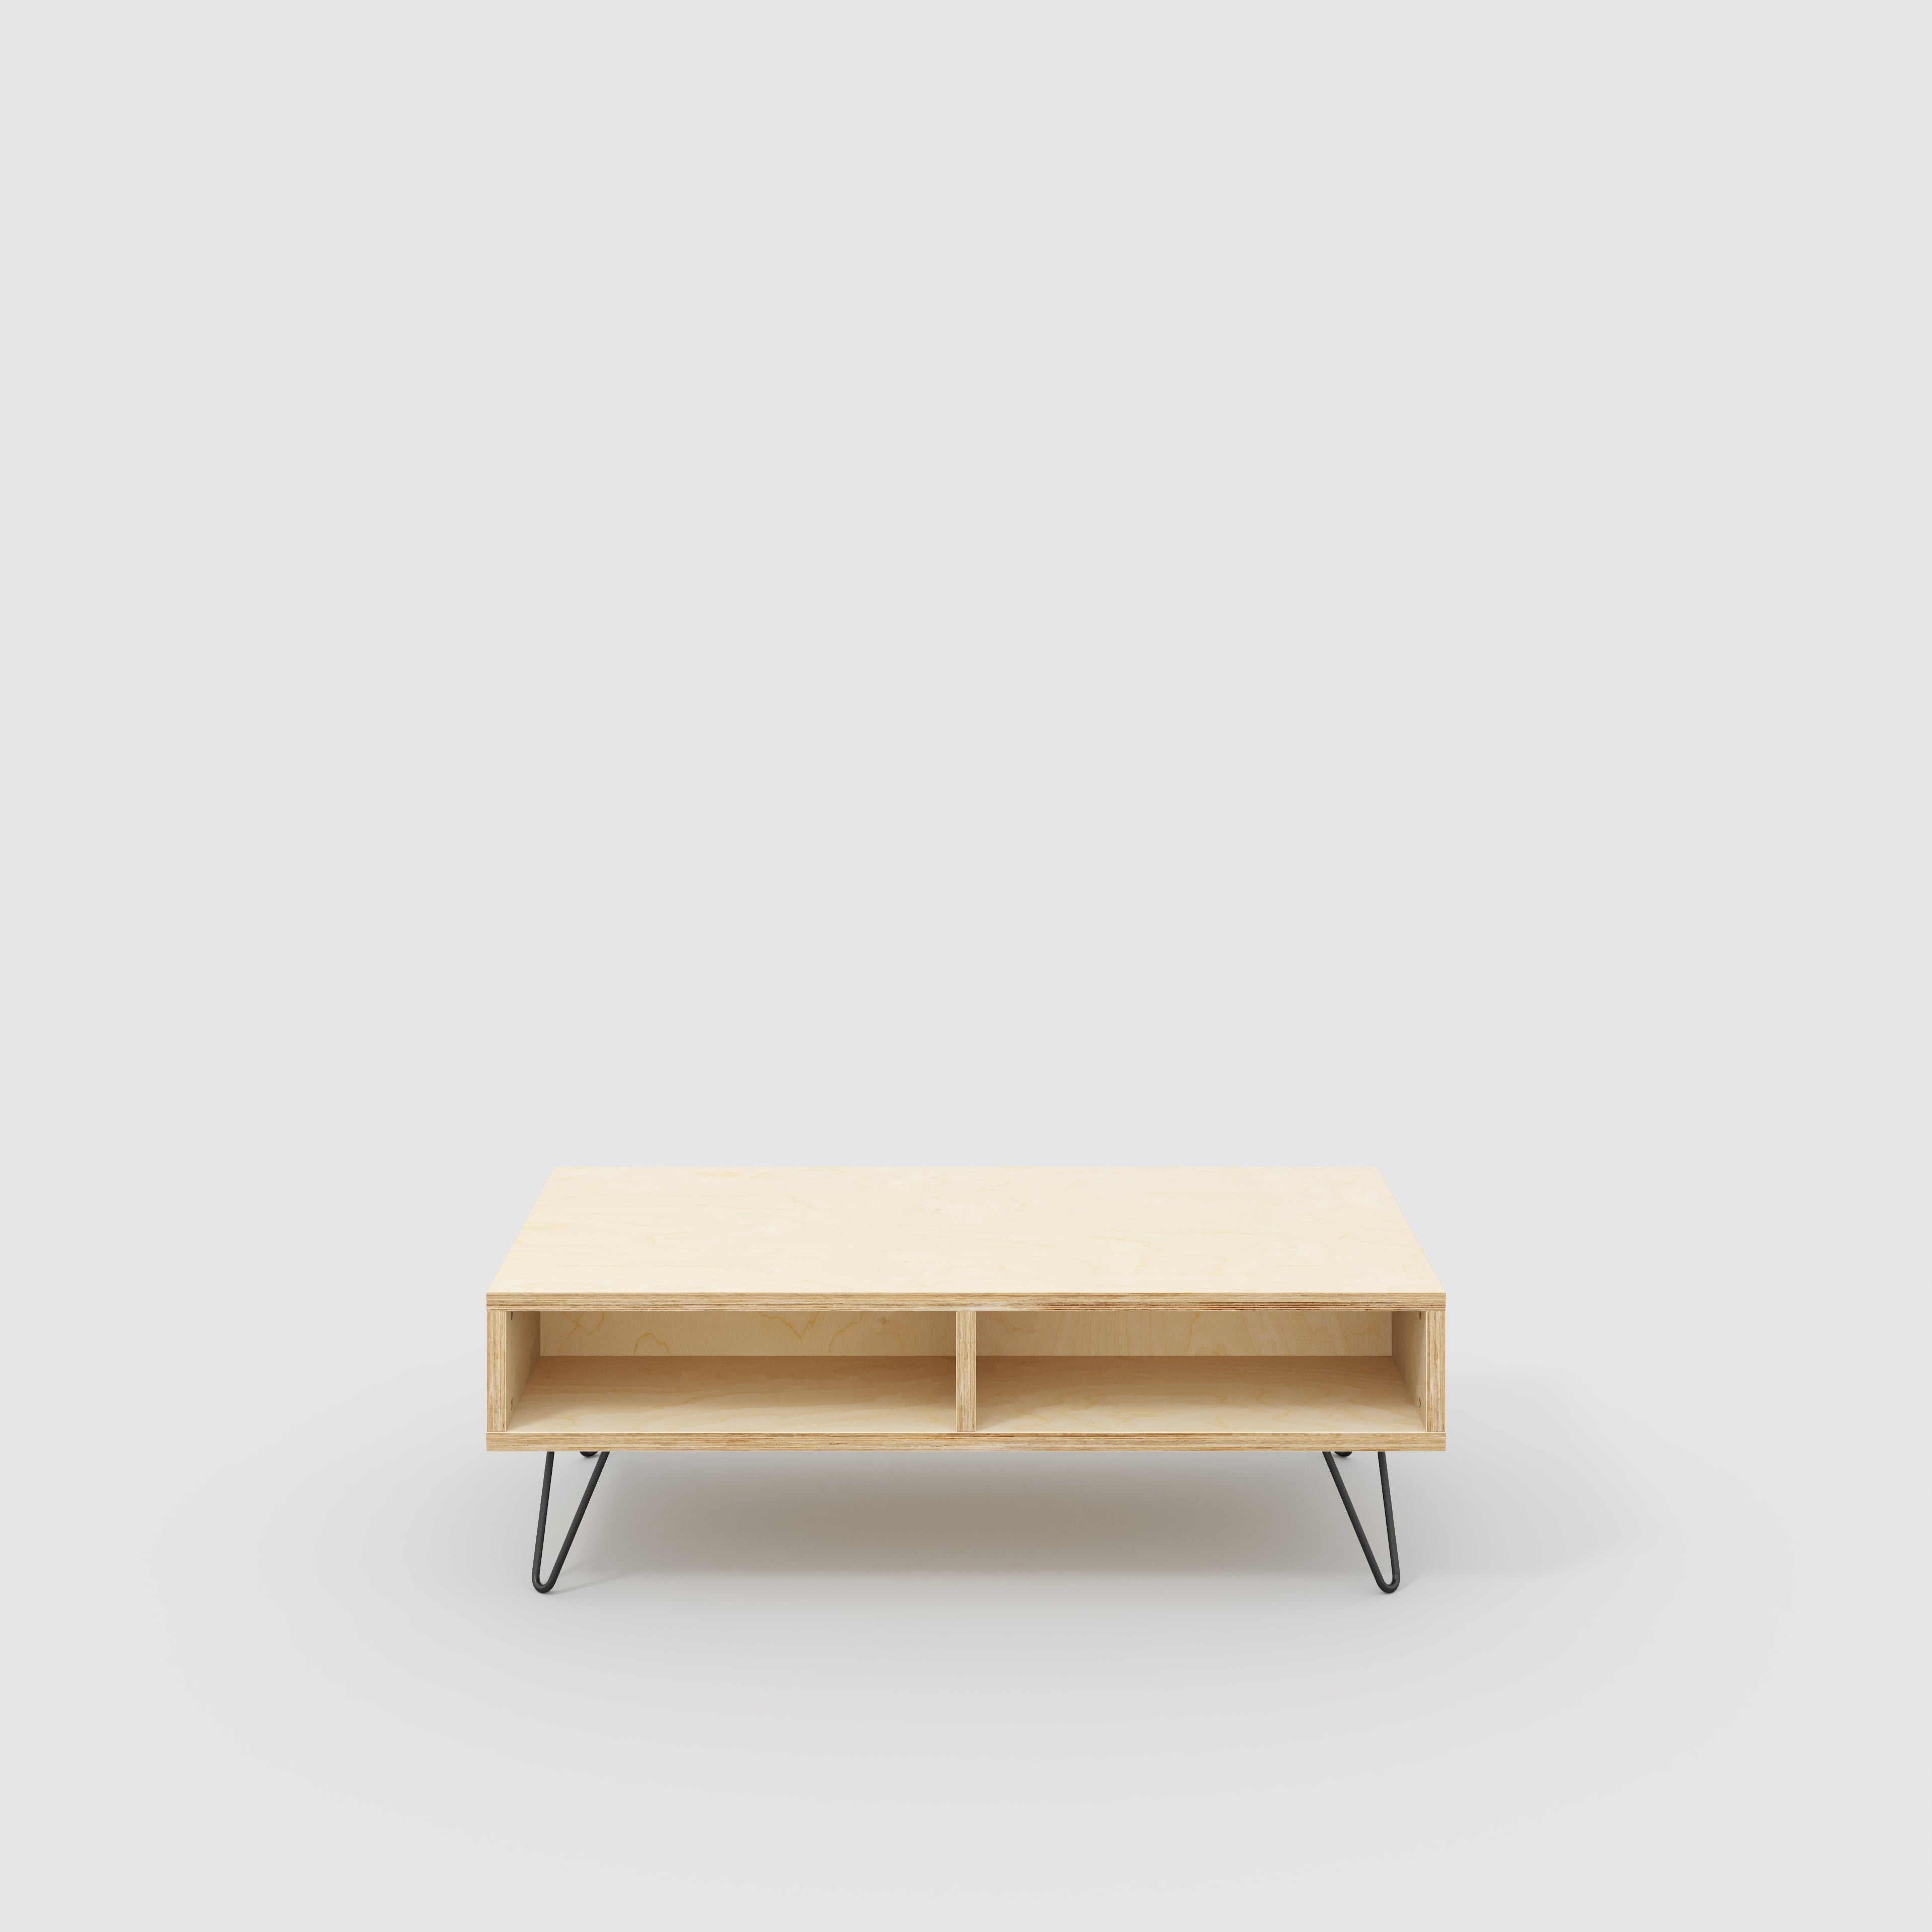 Coffee Table with Box Storage and Black Hairpin Legs - Plywood Birch - 1200(w) x 600(d) x 400(h)